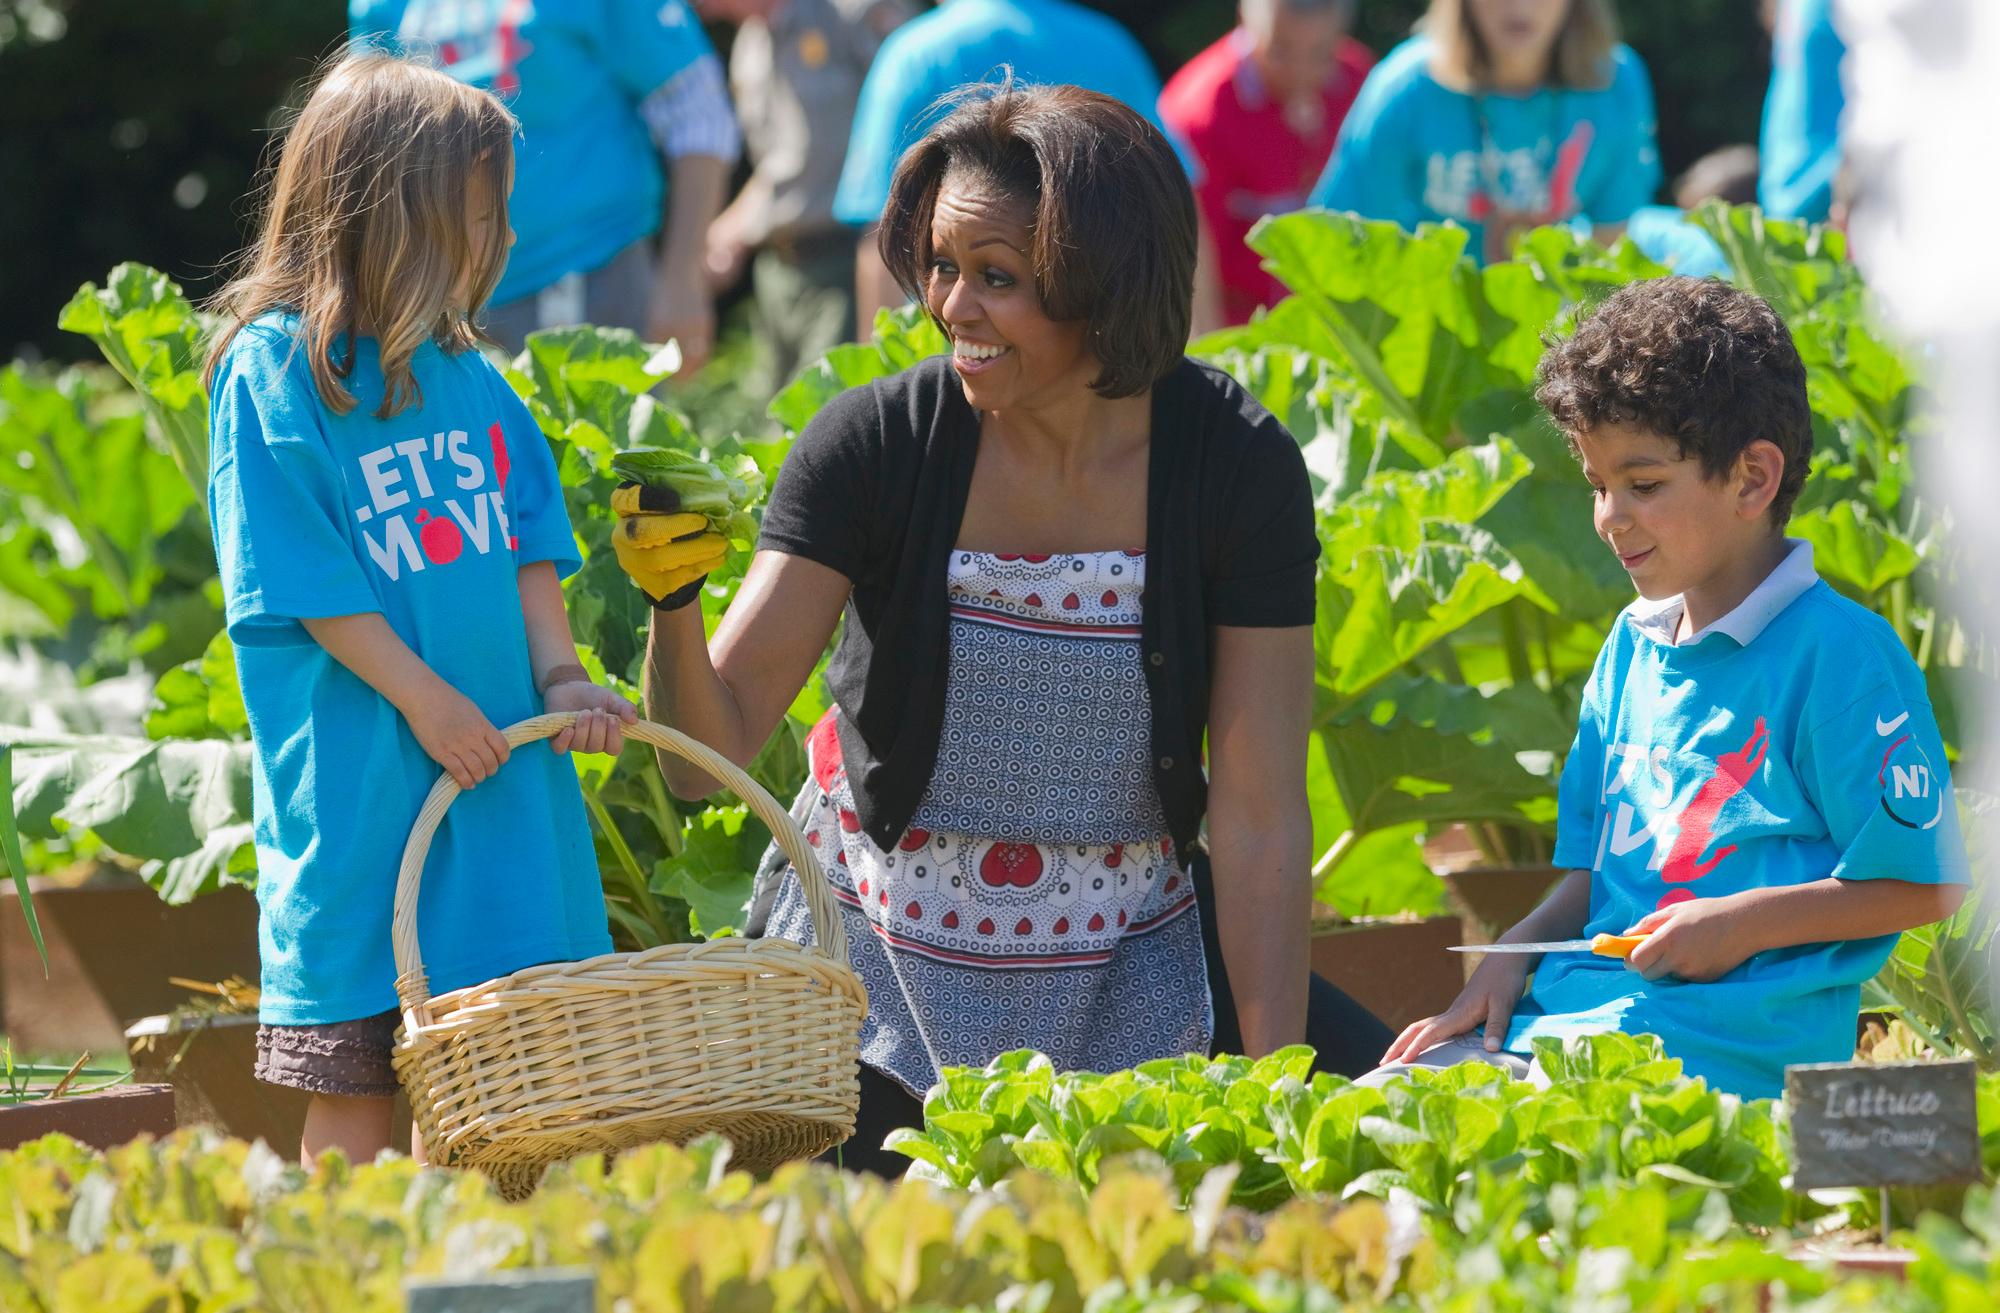 First lady Michelle Obama tends the White House garden in Washington, Friday, June 3, 2011, with a group of children as part of the "Let's Move!" campaign.  (AP Photo/Evan Vucci)